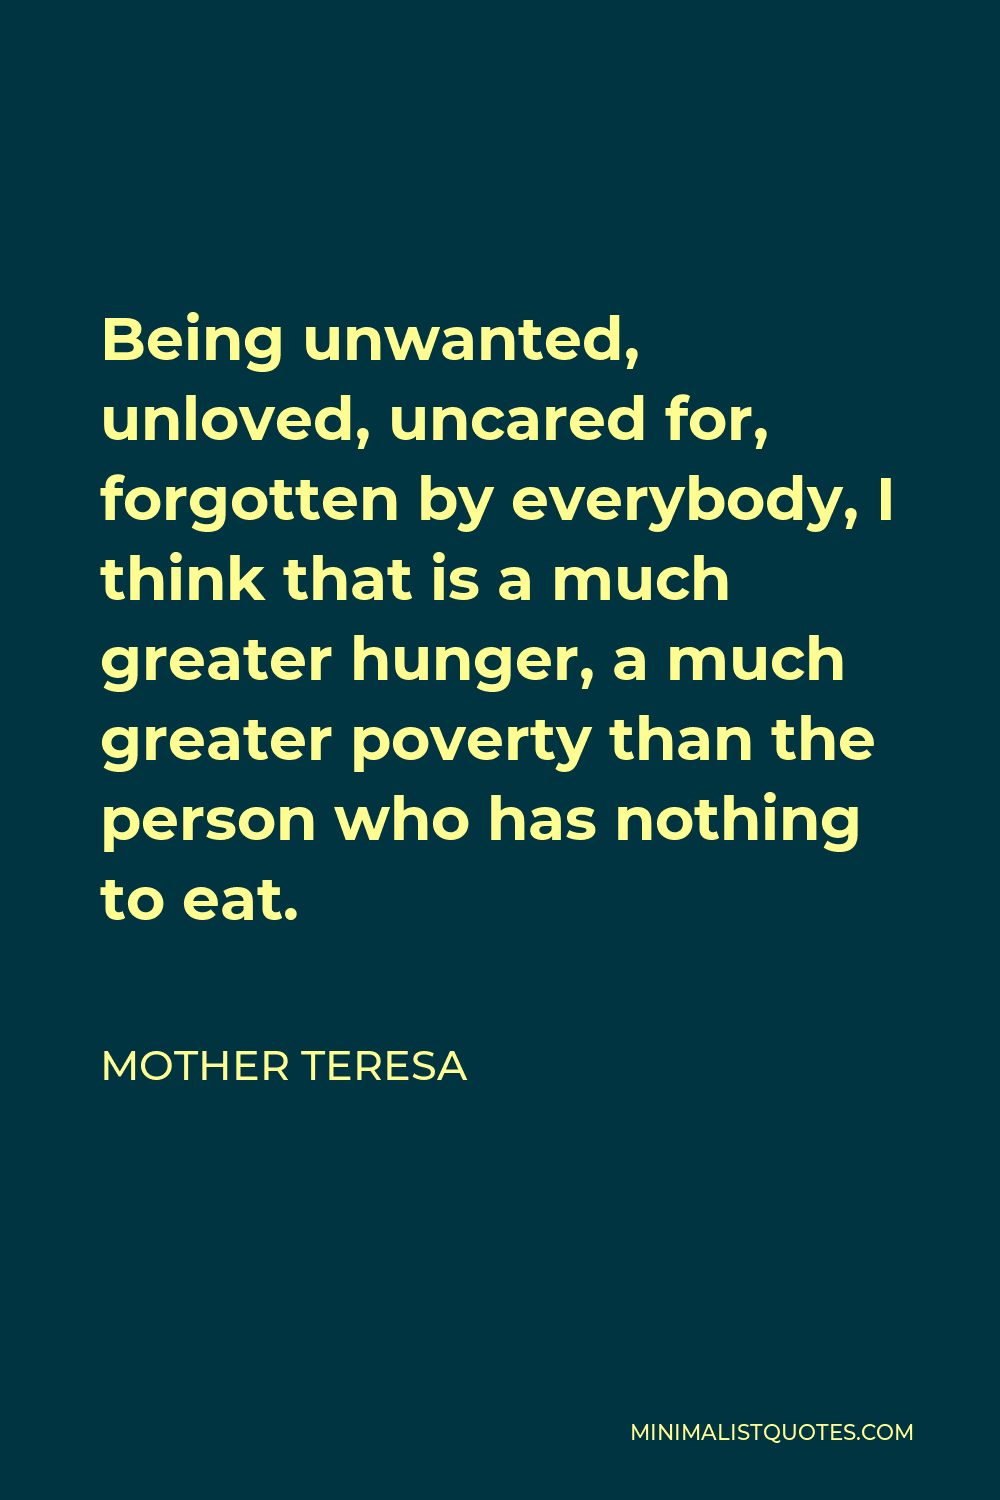 Mother Teresa Quote - Being unwanted, unloved, uncared for, forgotten by everybody, I think that is a much greater hunger, a much greater poverty than the person who has nothing to eat.